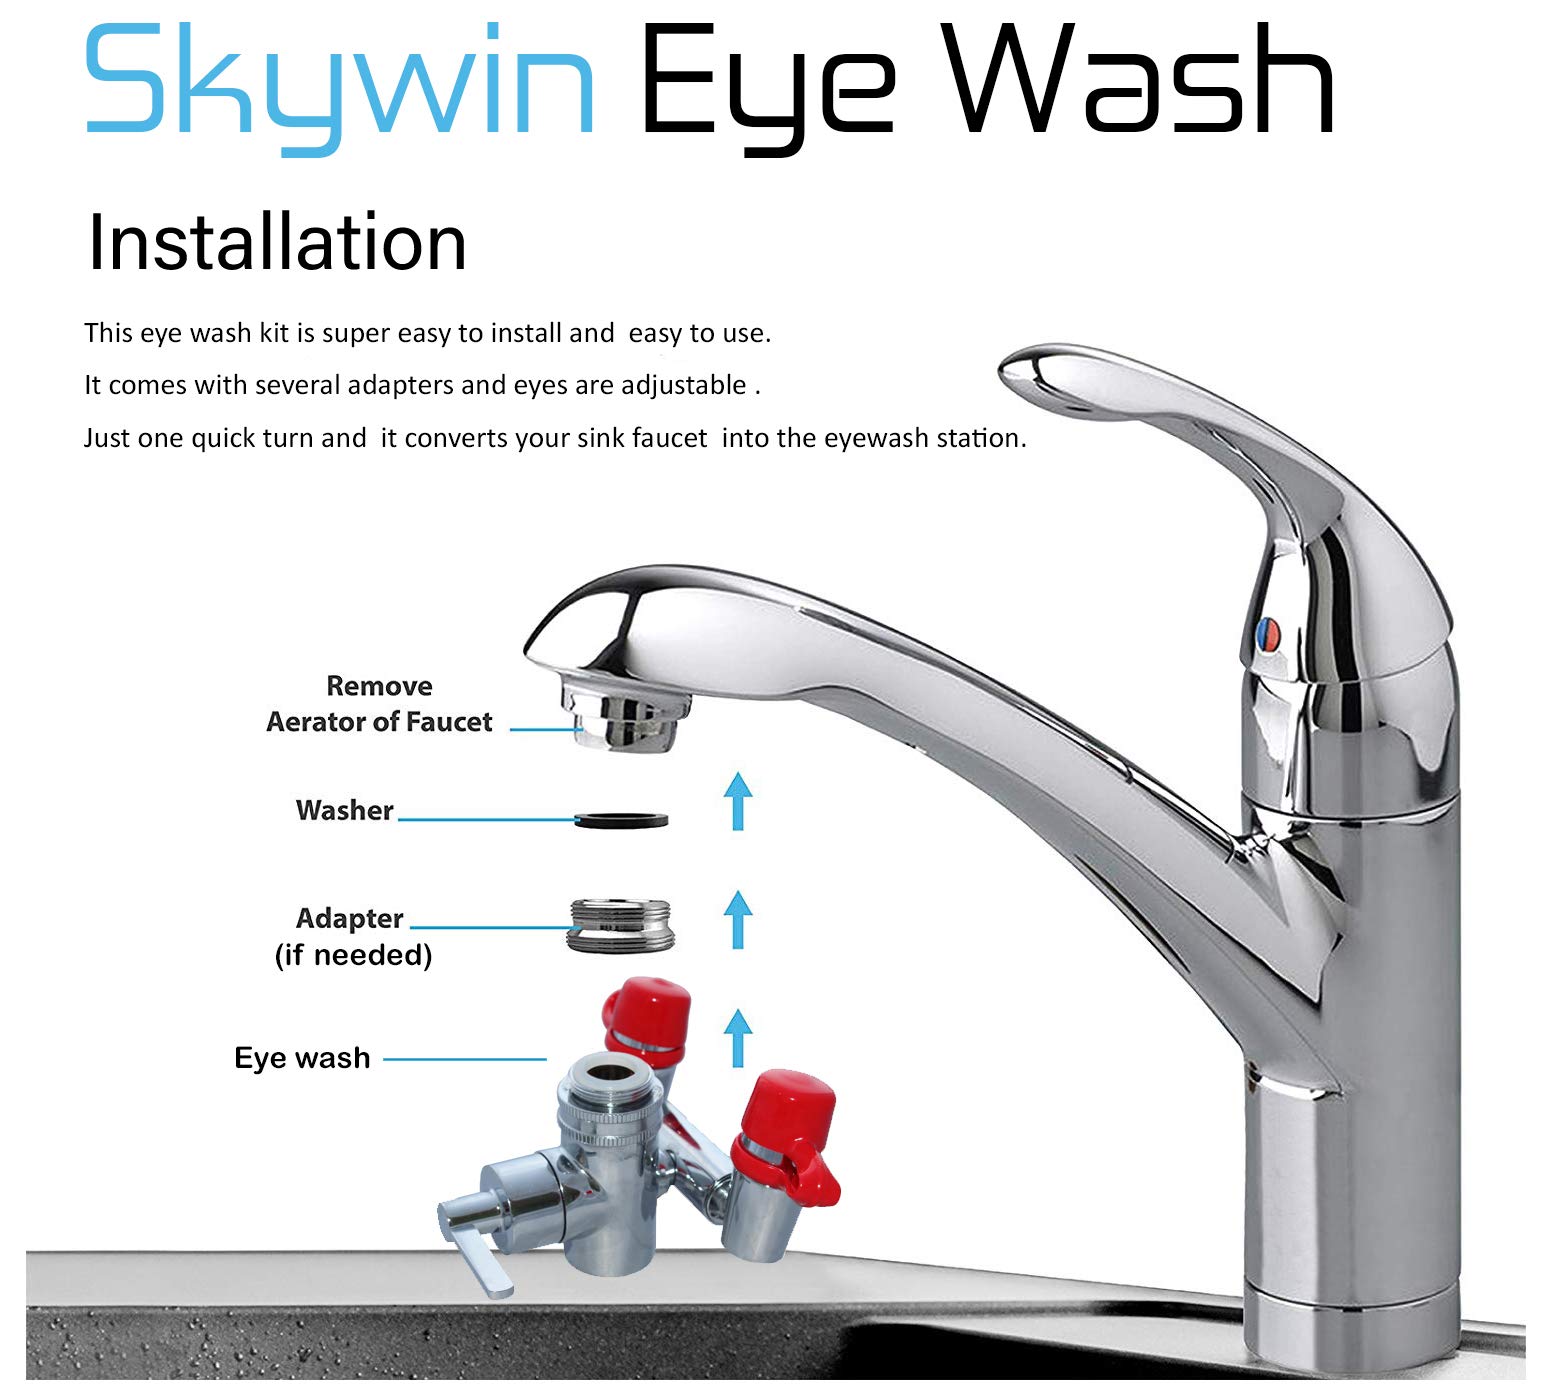 Skywin Eye Wash Kit - Faucet Mounted Emergency Eye Wash Station Sink Attachment -1x Continuous Flow Eyewash Station,3X Common Sink Adapter,2X Inspection Tag,1x Emergency Eye Wash Station Sign